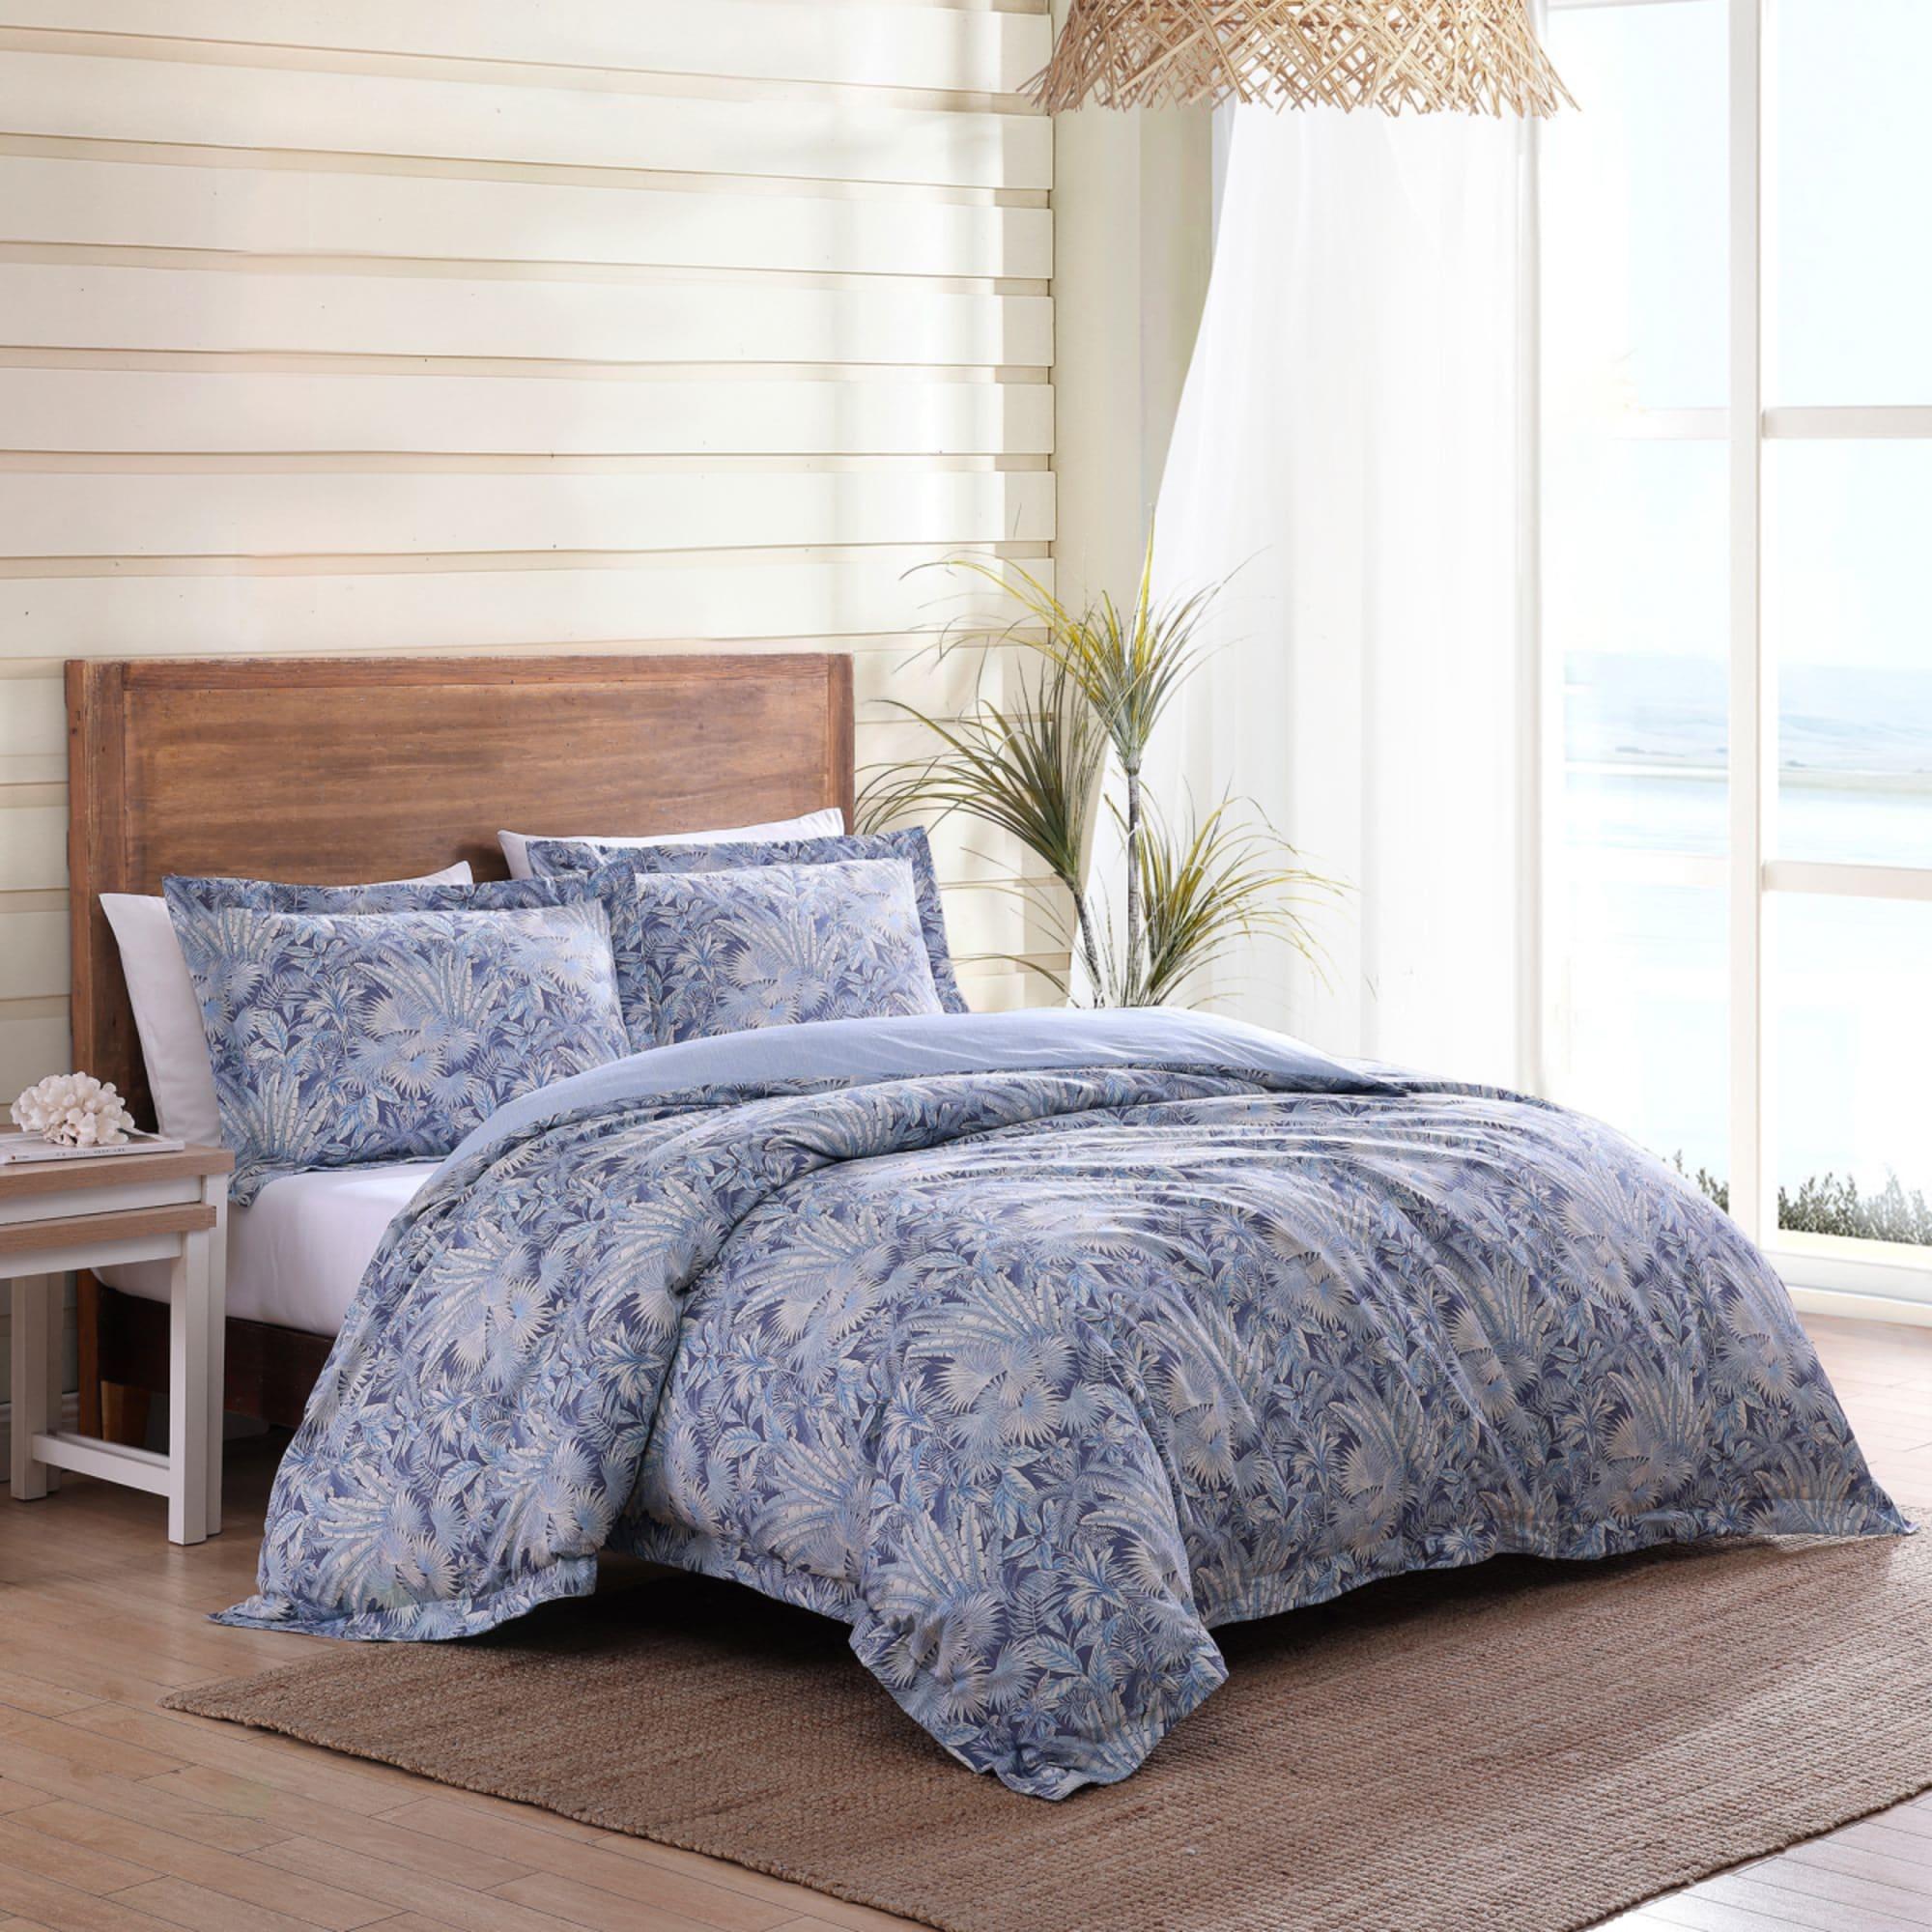 Tommy Bahama Bahamian Quilt Cover Set Super King Image 3